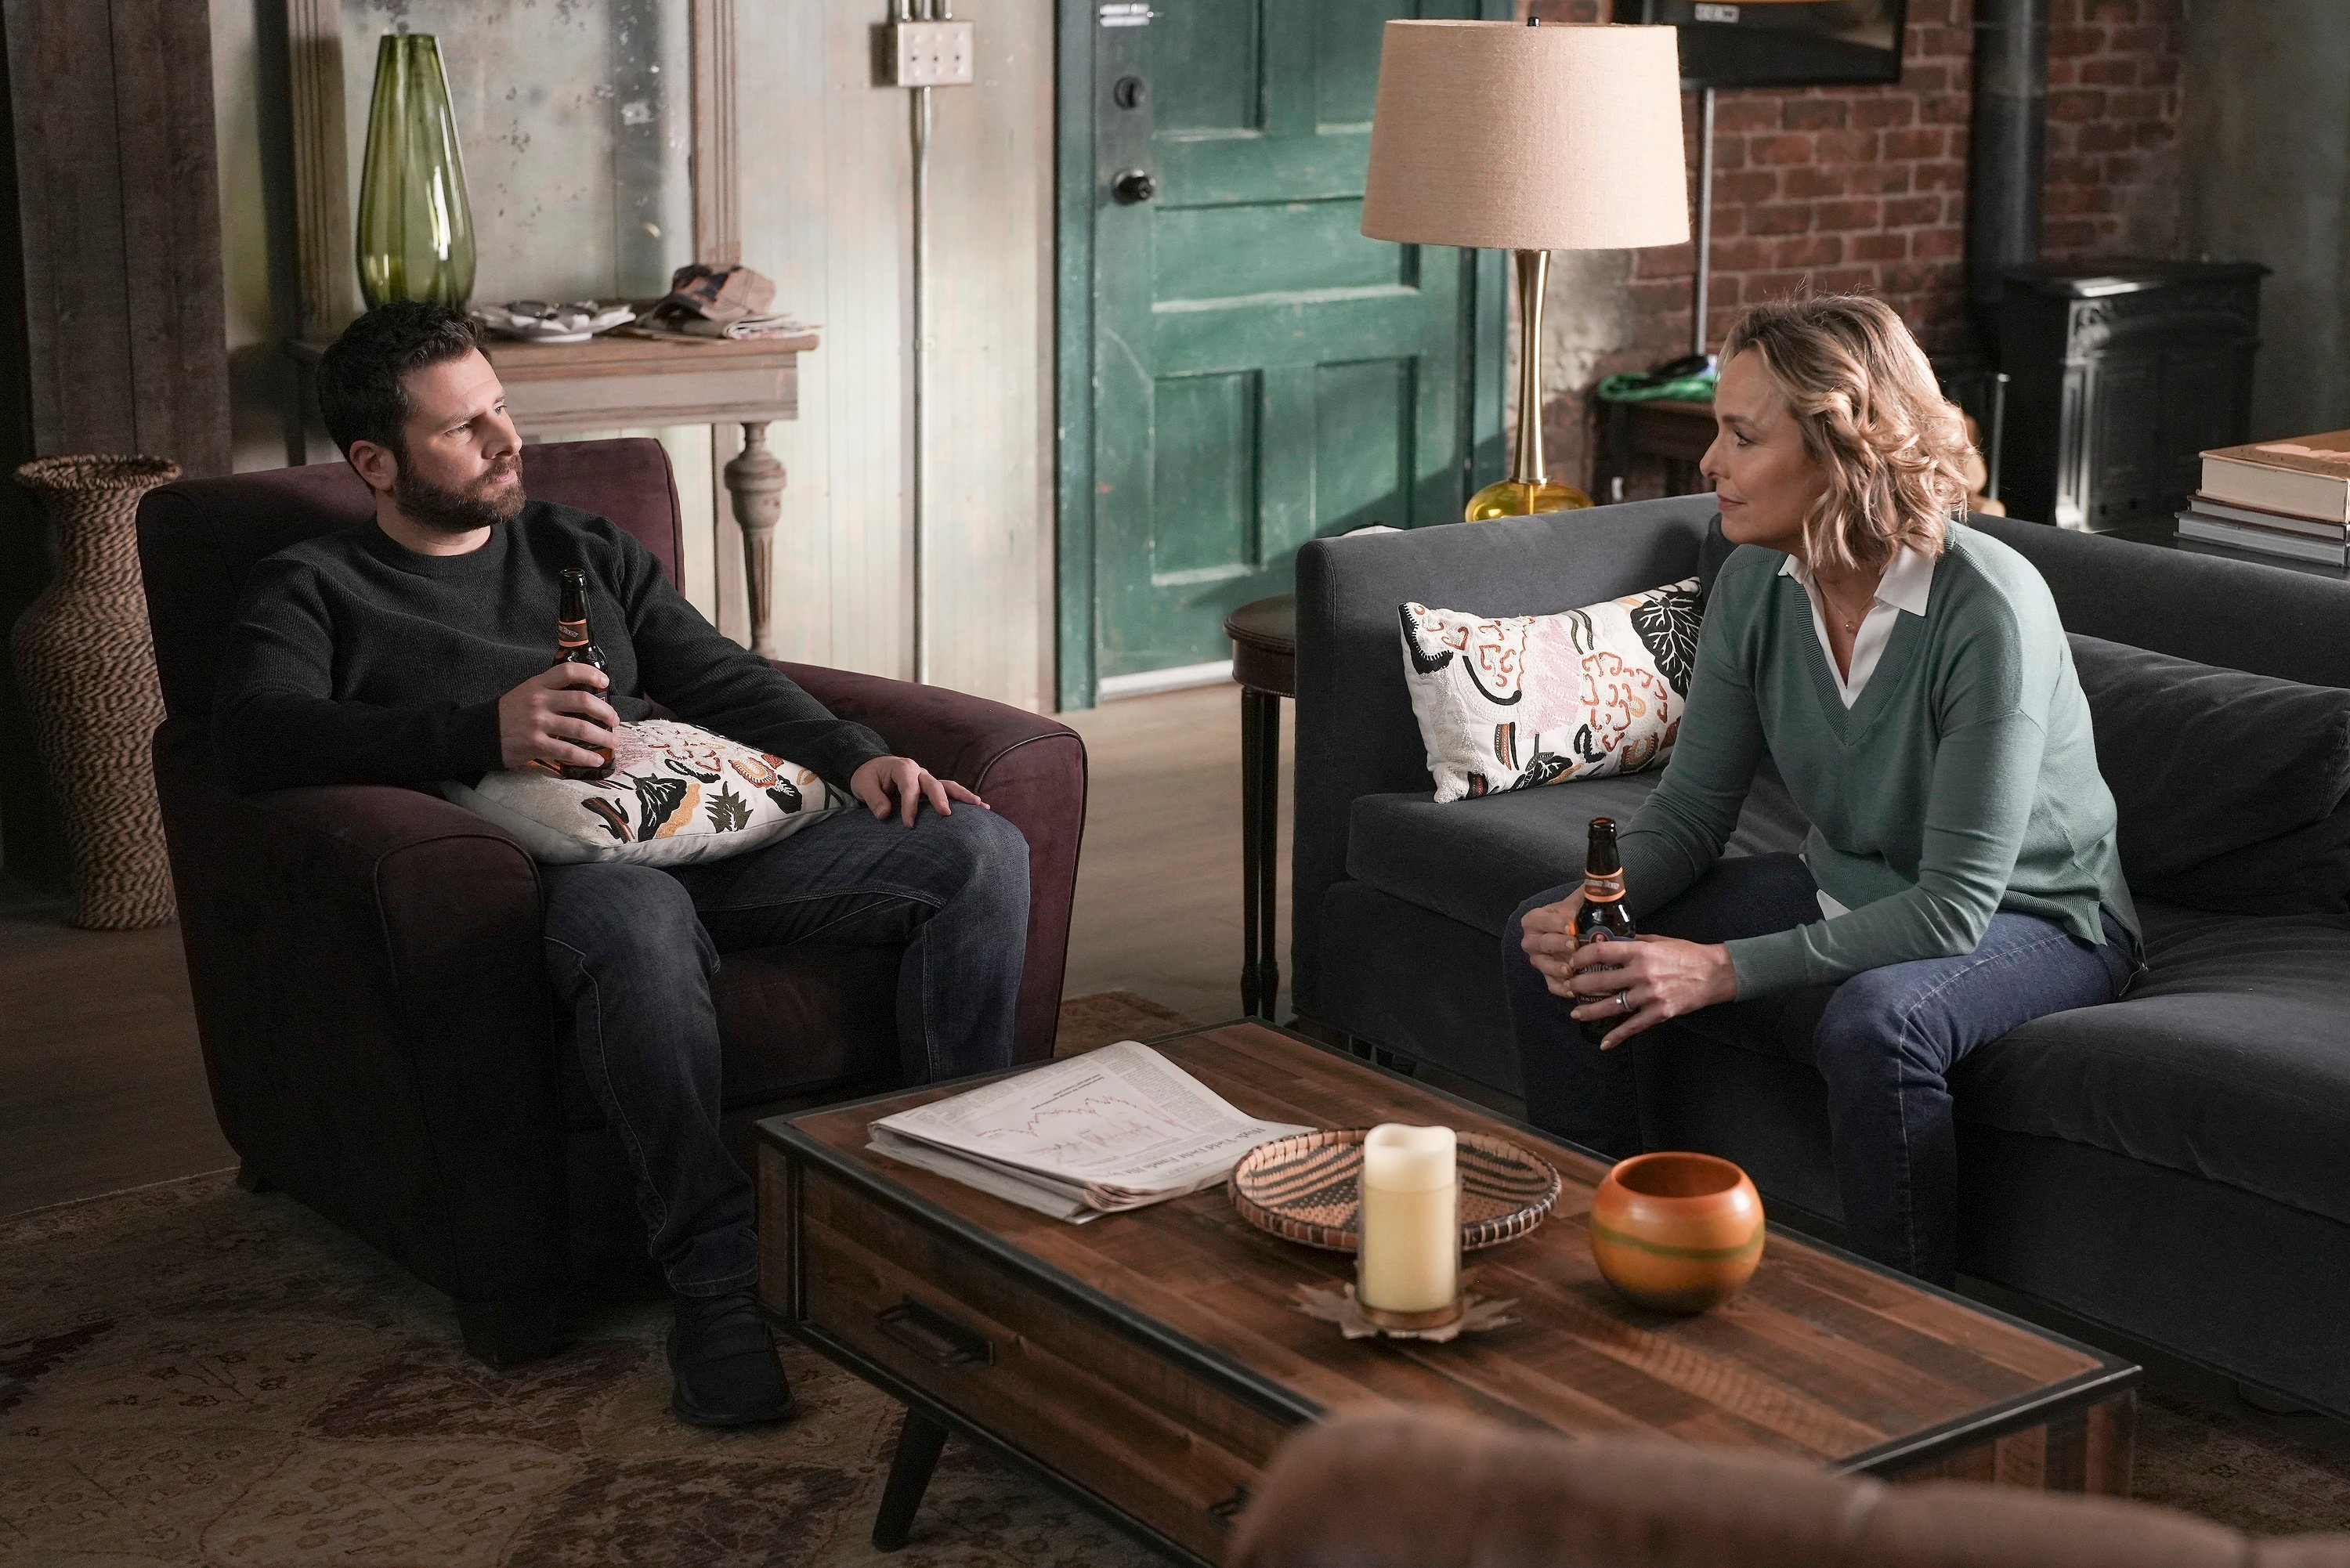 'A Million Little Things' James Roday Rodriguez as Gary and Melora Hardin as Patricia Bloom talking together while having a drink